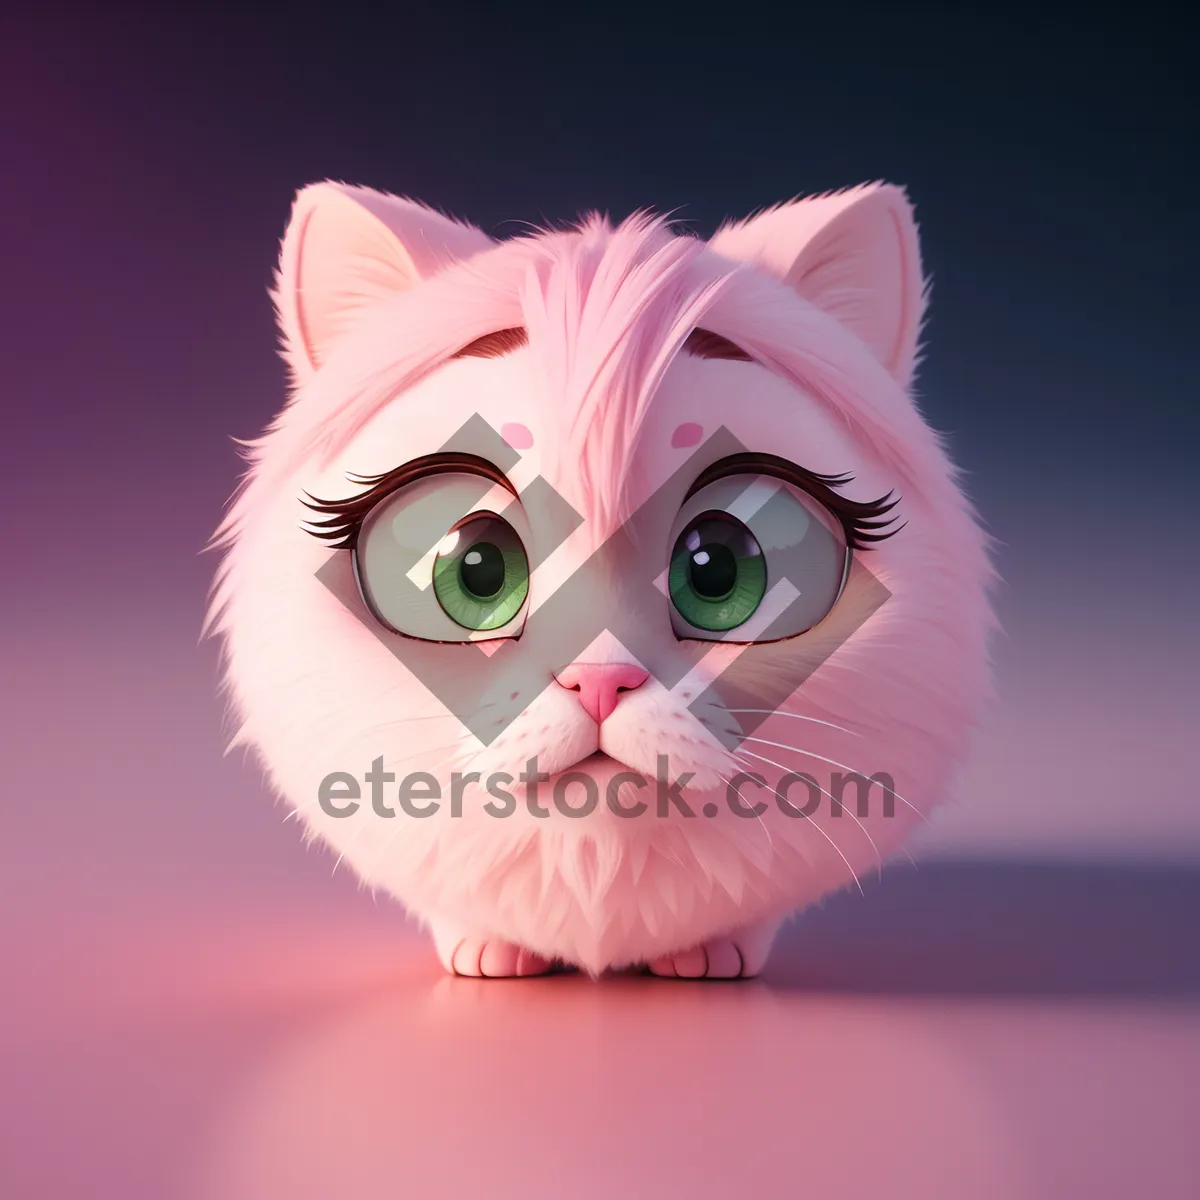 Picture of Adorable Cartoon Kitty - Cute Domestic Baby Kitten Art